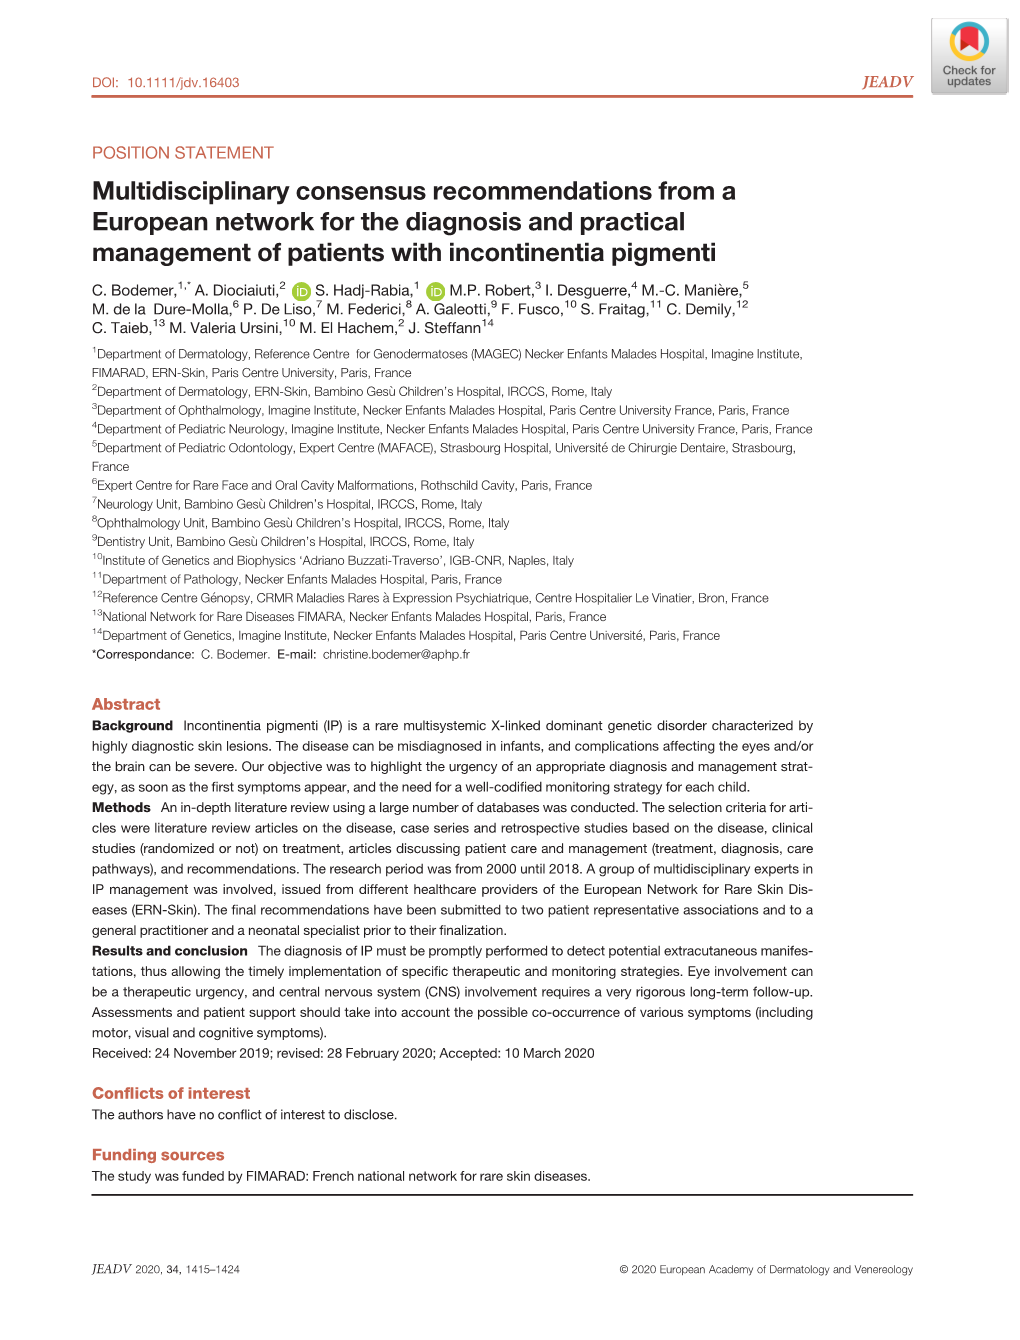 Multidisciplinary Consensus Recommendations from a European Network for the Diagnosis and Practical Management of Patients with Incontinentia Pigmenti